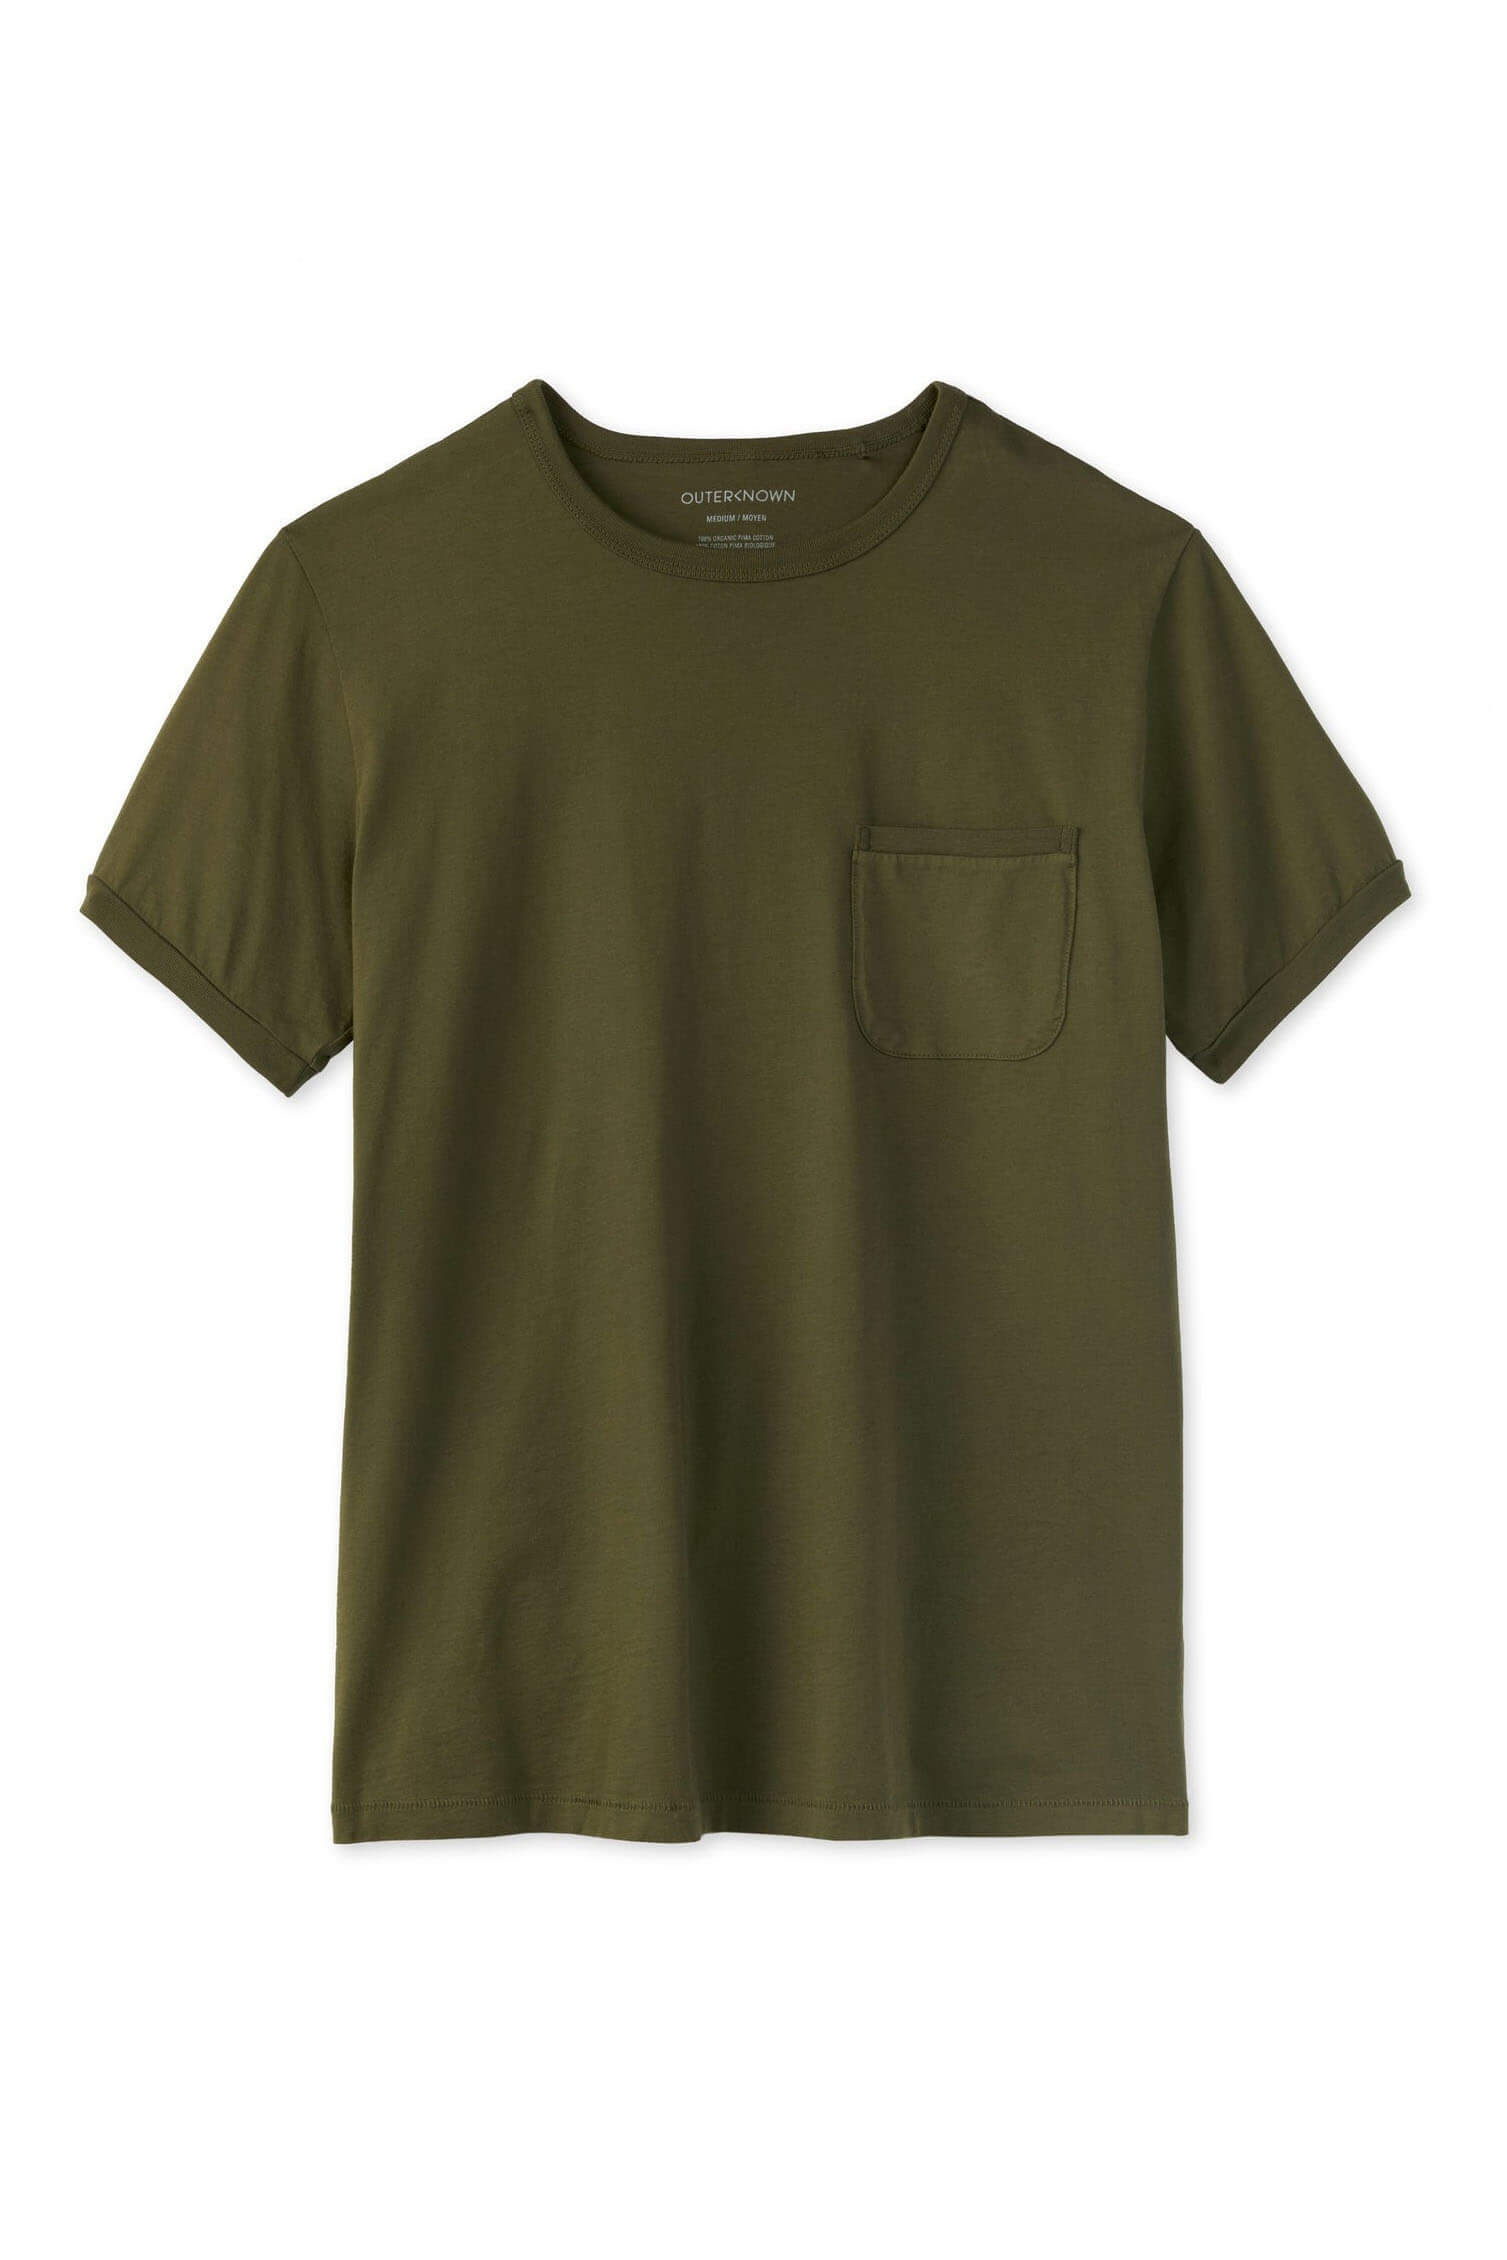 Outerknown sojourn pocket tee in olive